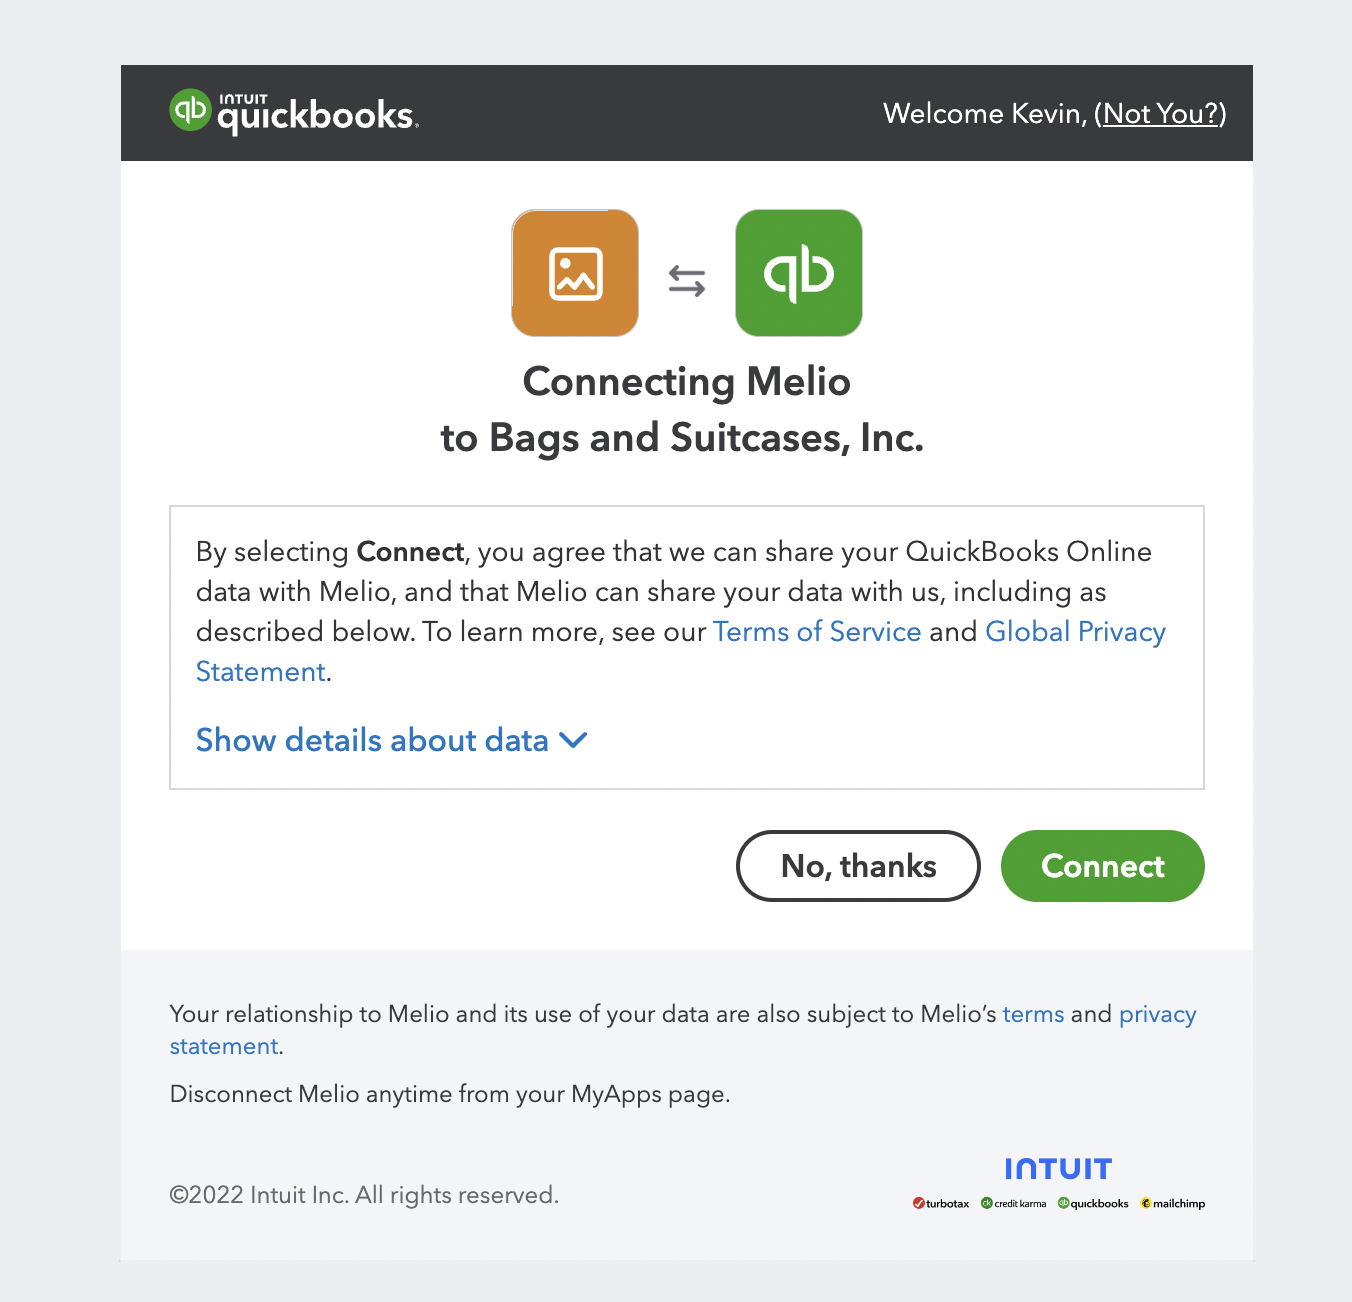 click_connect_in_quickbooks_popup.png